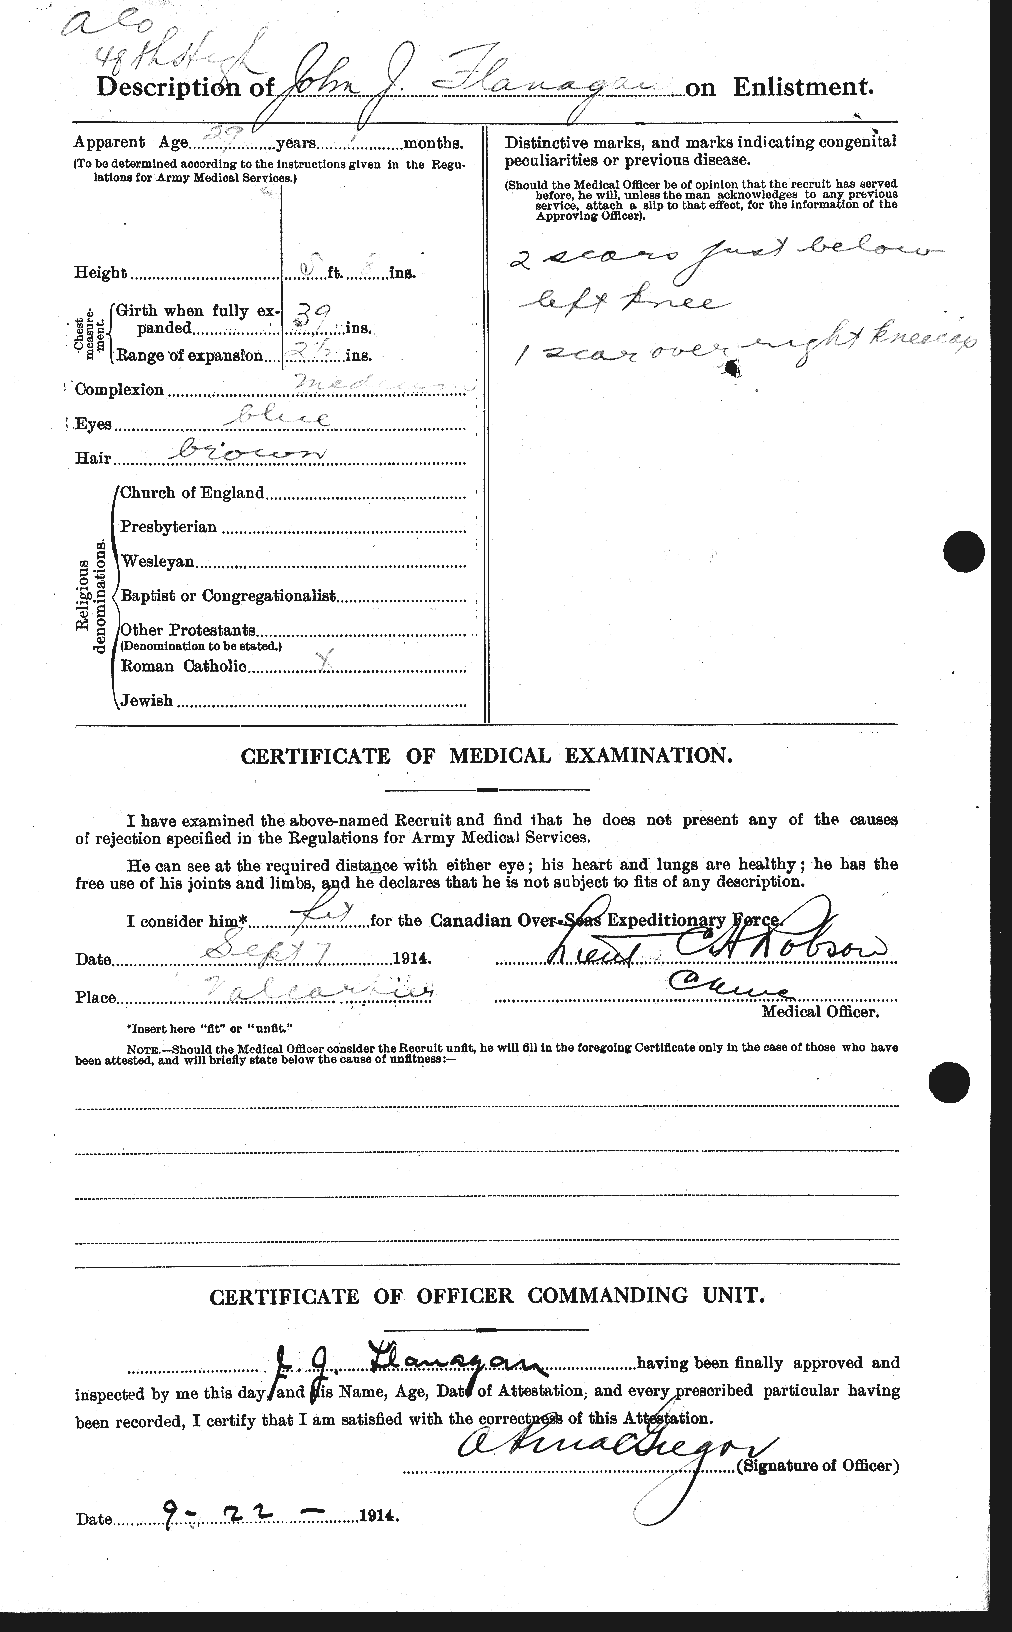 Personnel Records of the First World War - CEF 323477b